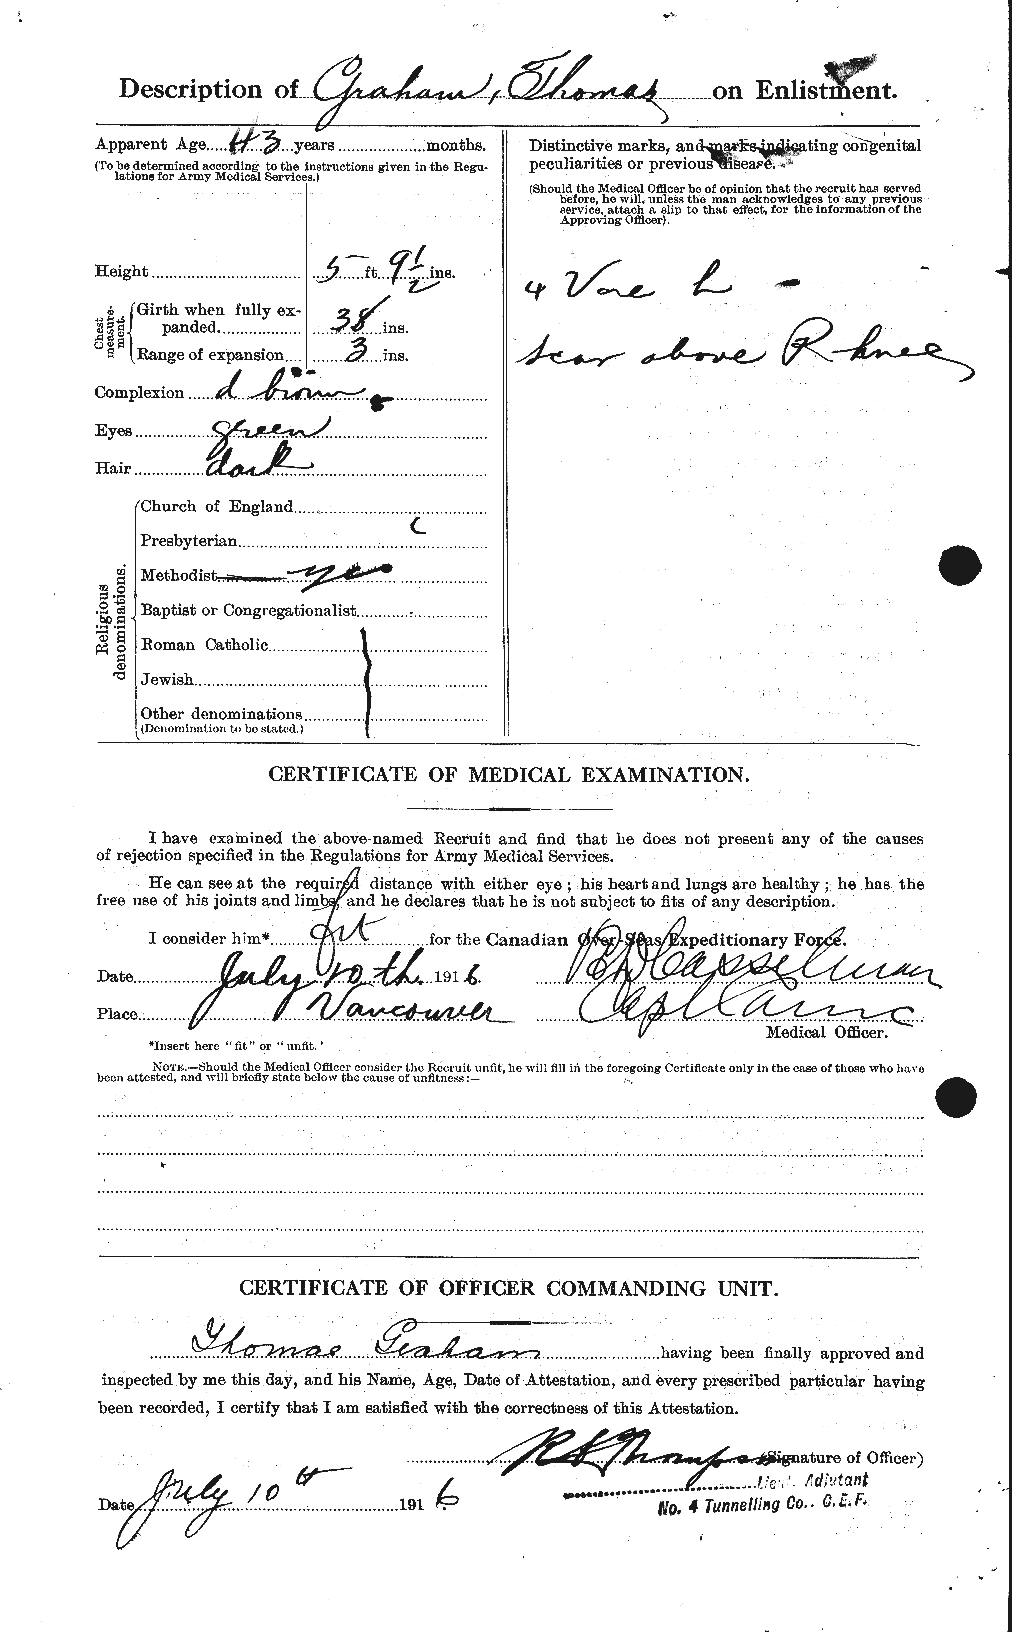 Personnel Records of the First World War - CEF 359496b